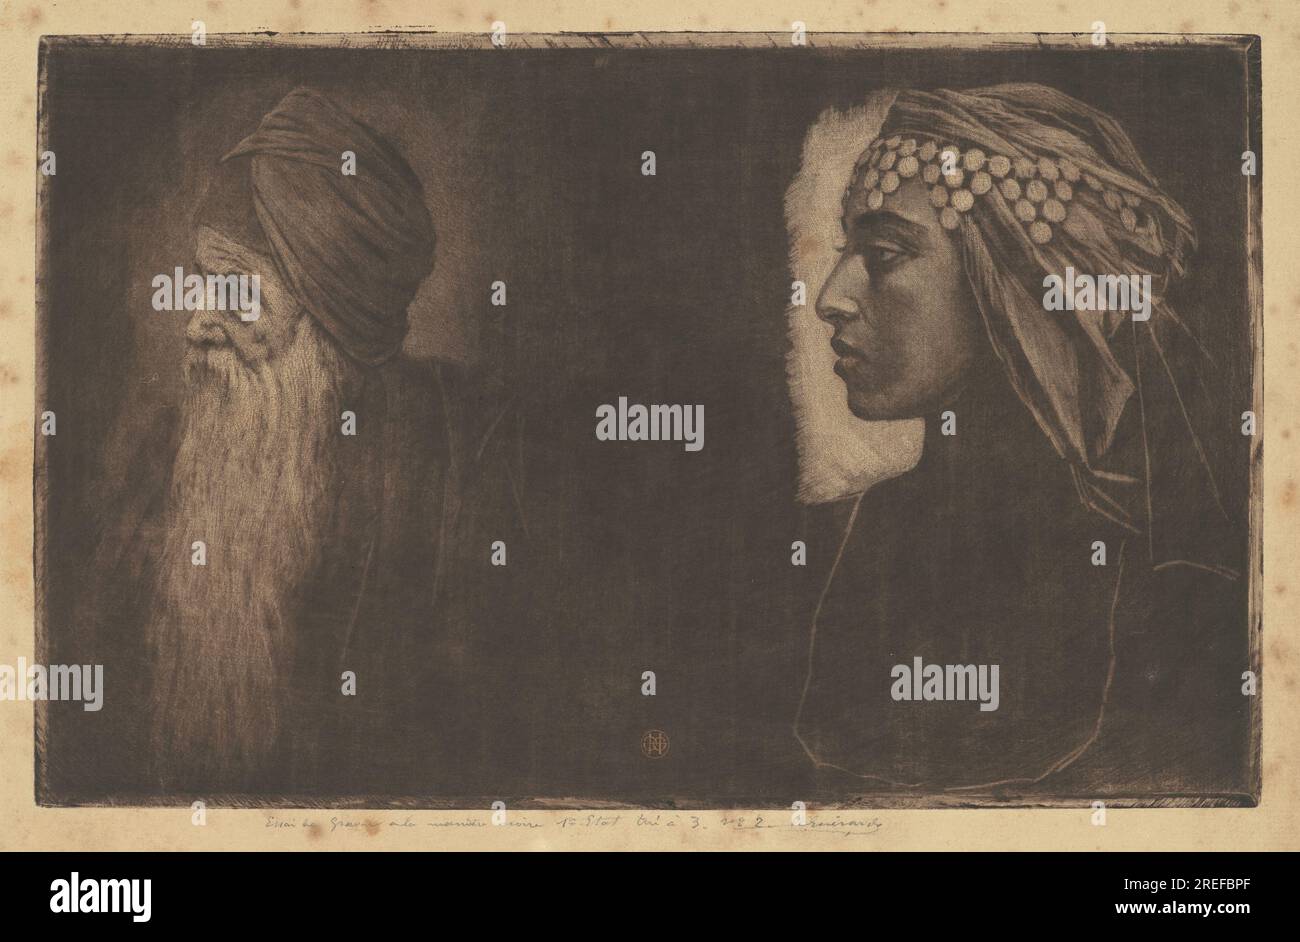 'Henri-Charles Guérard, Salomon and Cleopatra, c. 1890, mezzotint on laid paper, plate: 19.6 × 30.5 cm (7 11/16 × 12 in.) sheet: 23.5 × 35 cm (9 1/4 × 13 3/4 in.), Ailsa Mellon Bruce Fund, 2016.37.2' Stock Photo